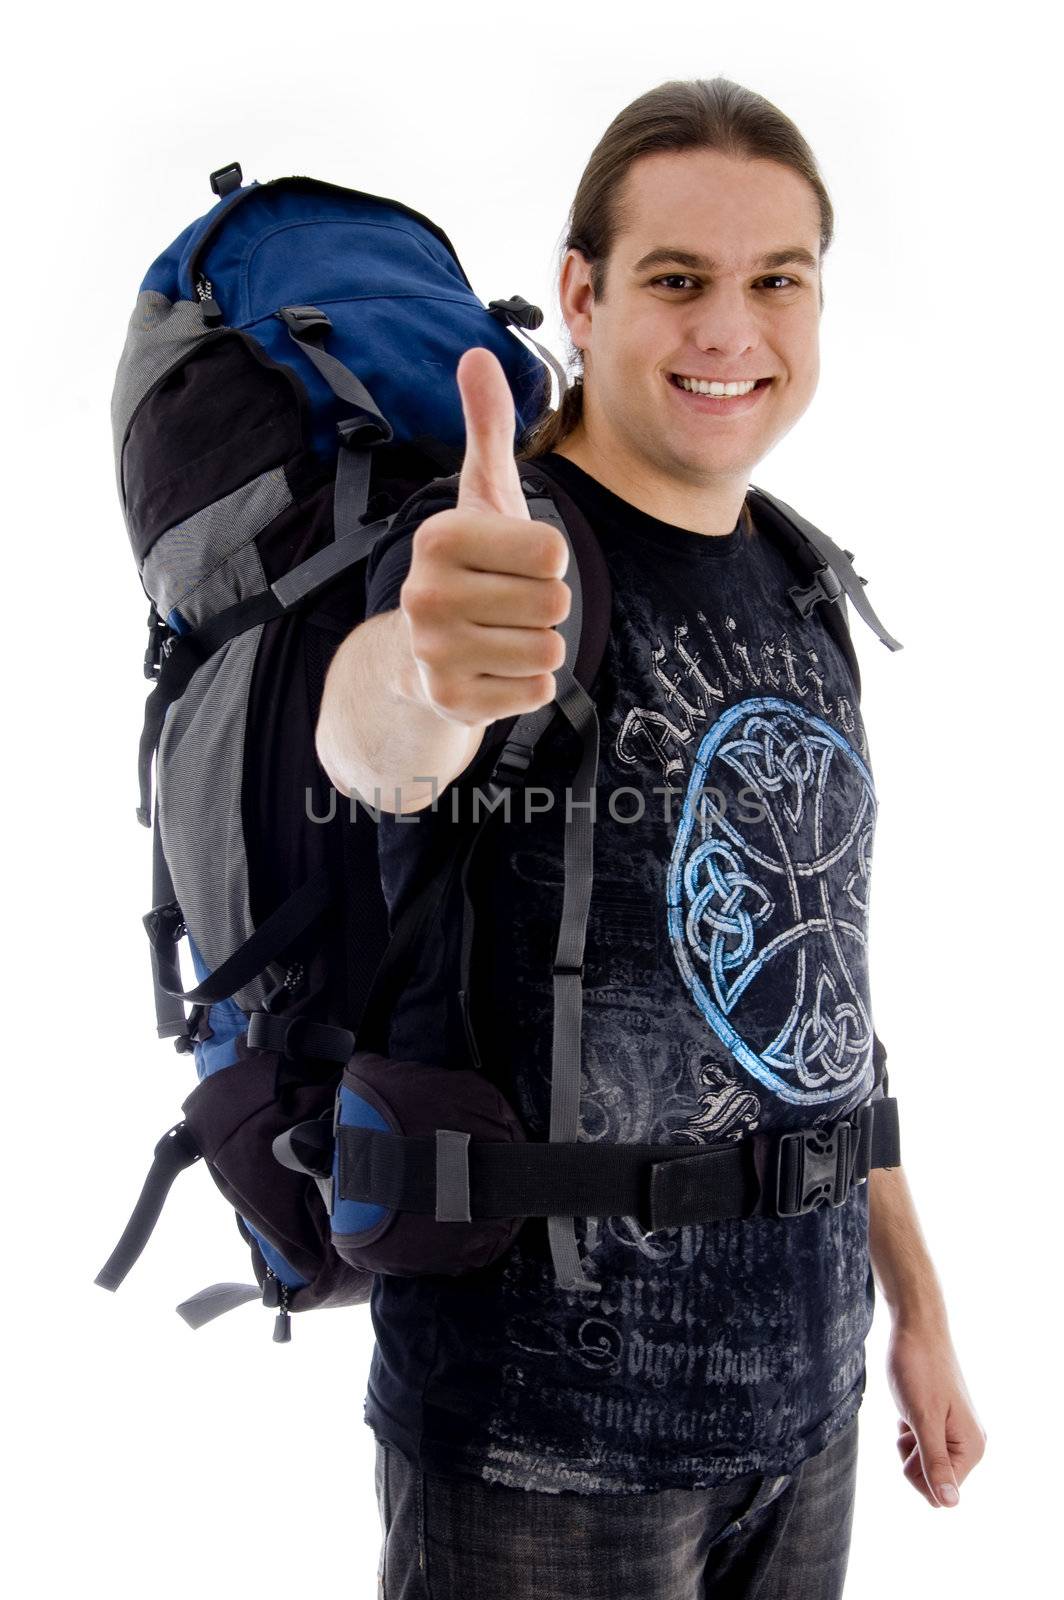 traveler with rucksack and thumbs up on an isolated white background